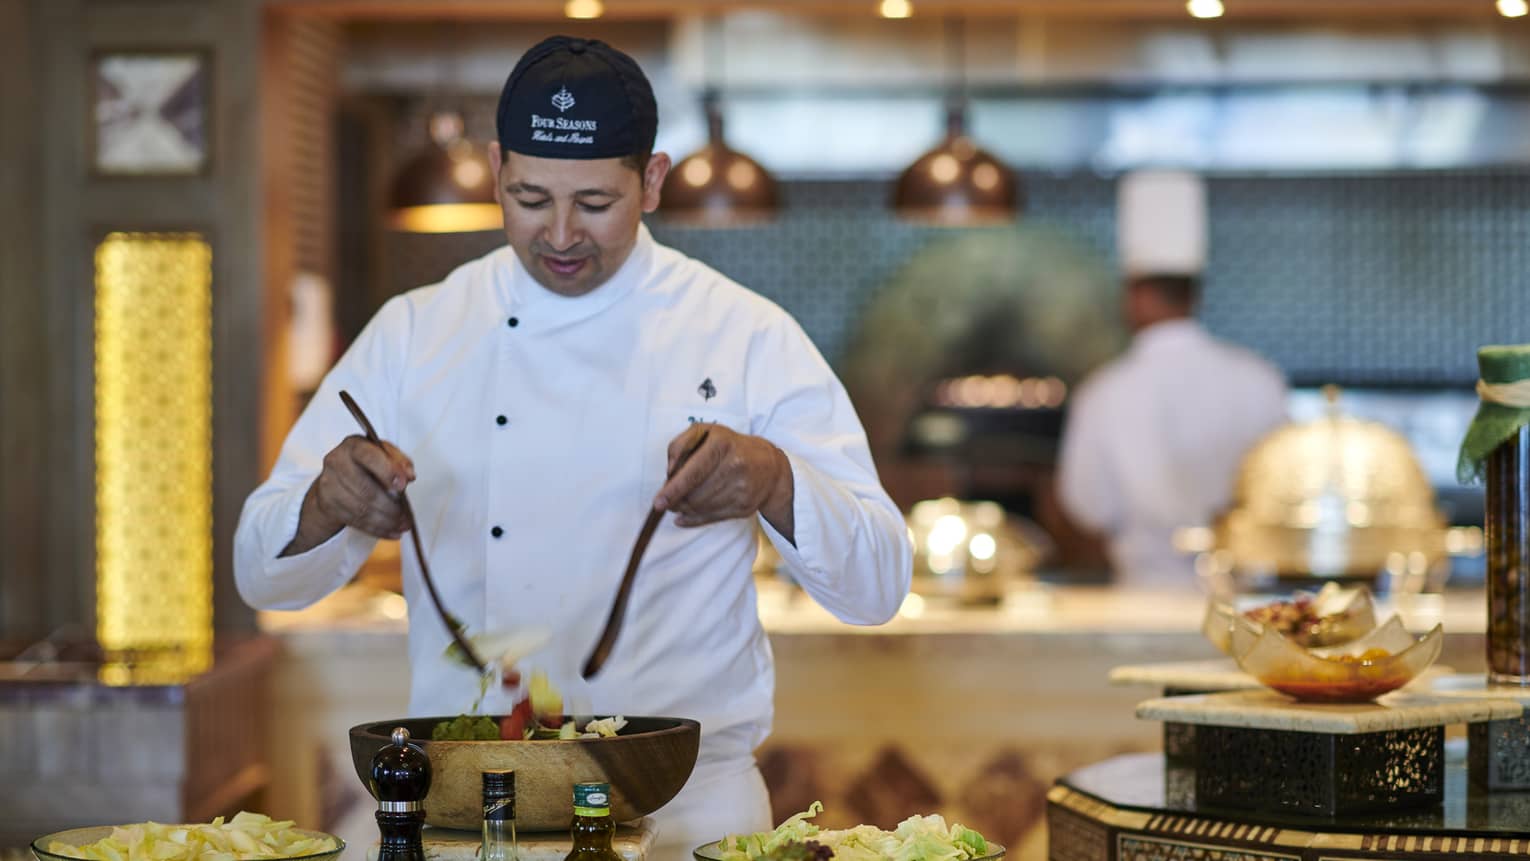 Chef tosses salad at buffet station with chopped vegetables in bowls